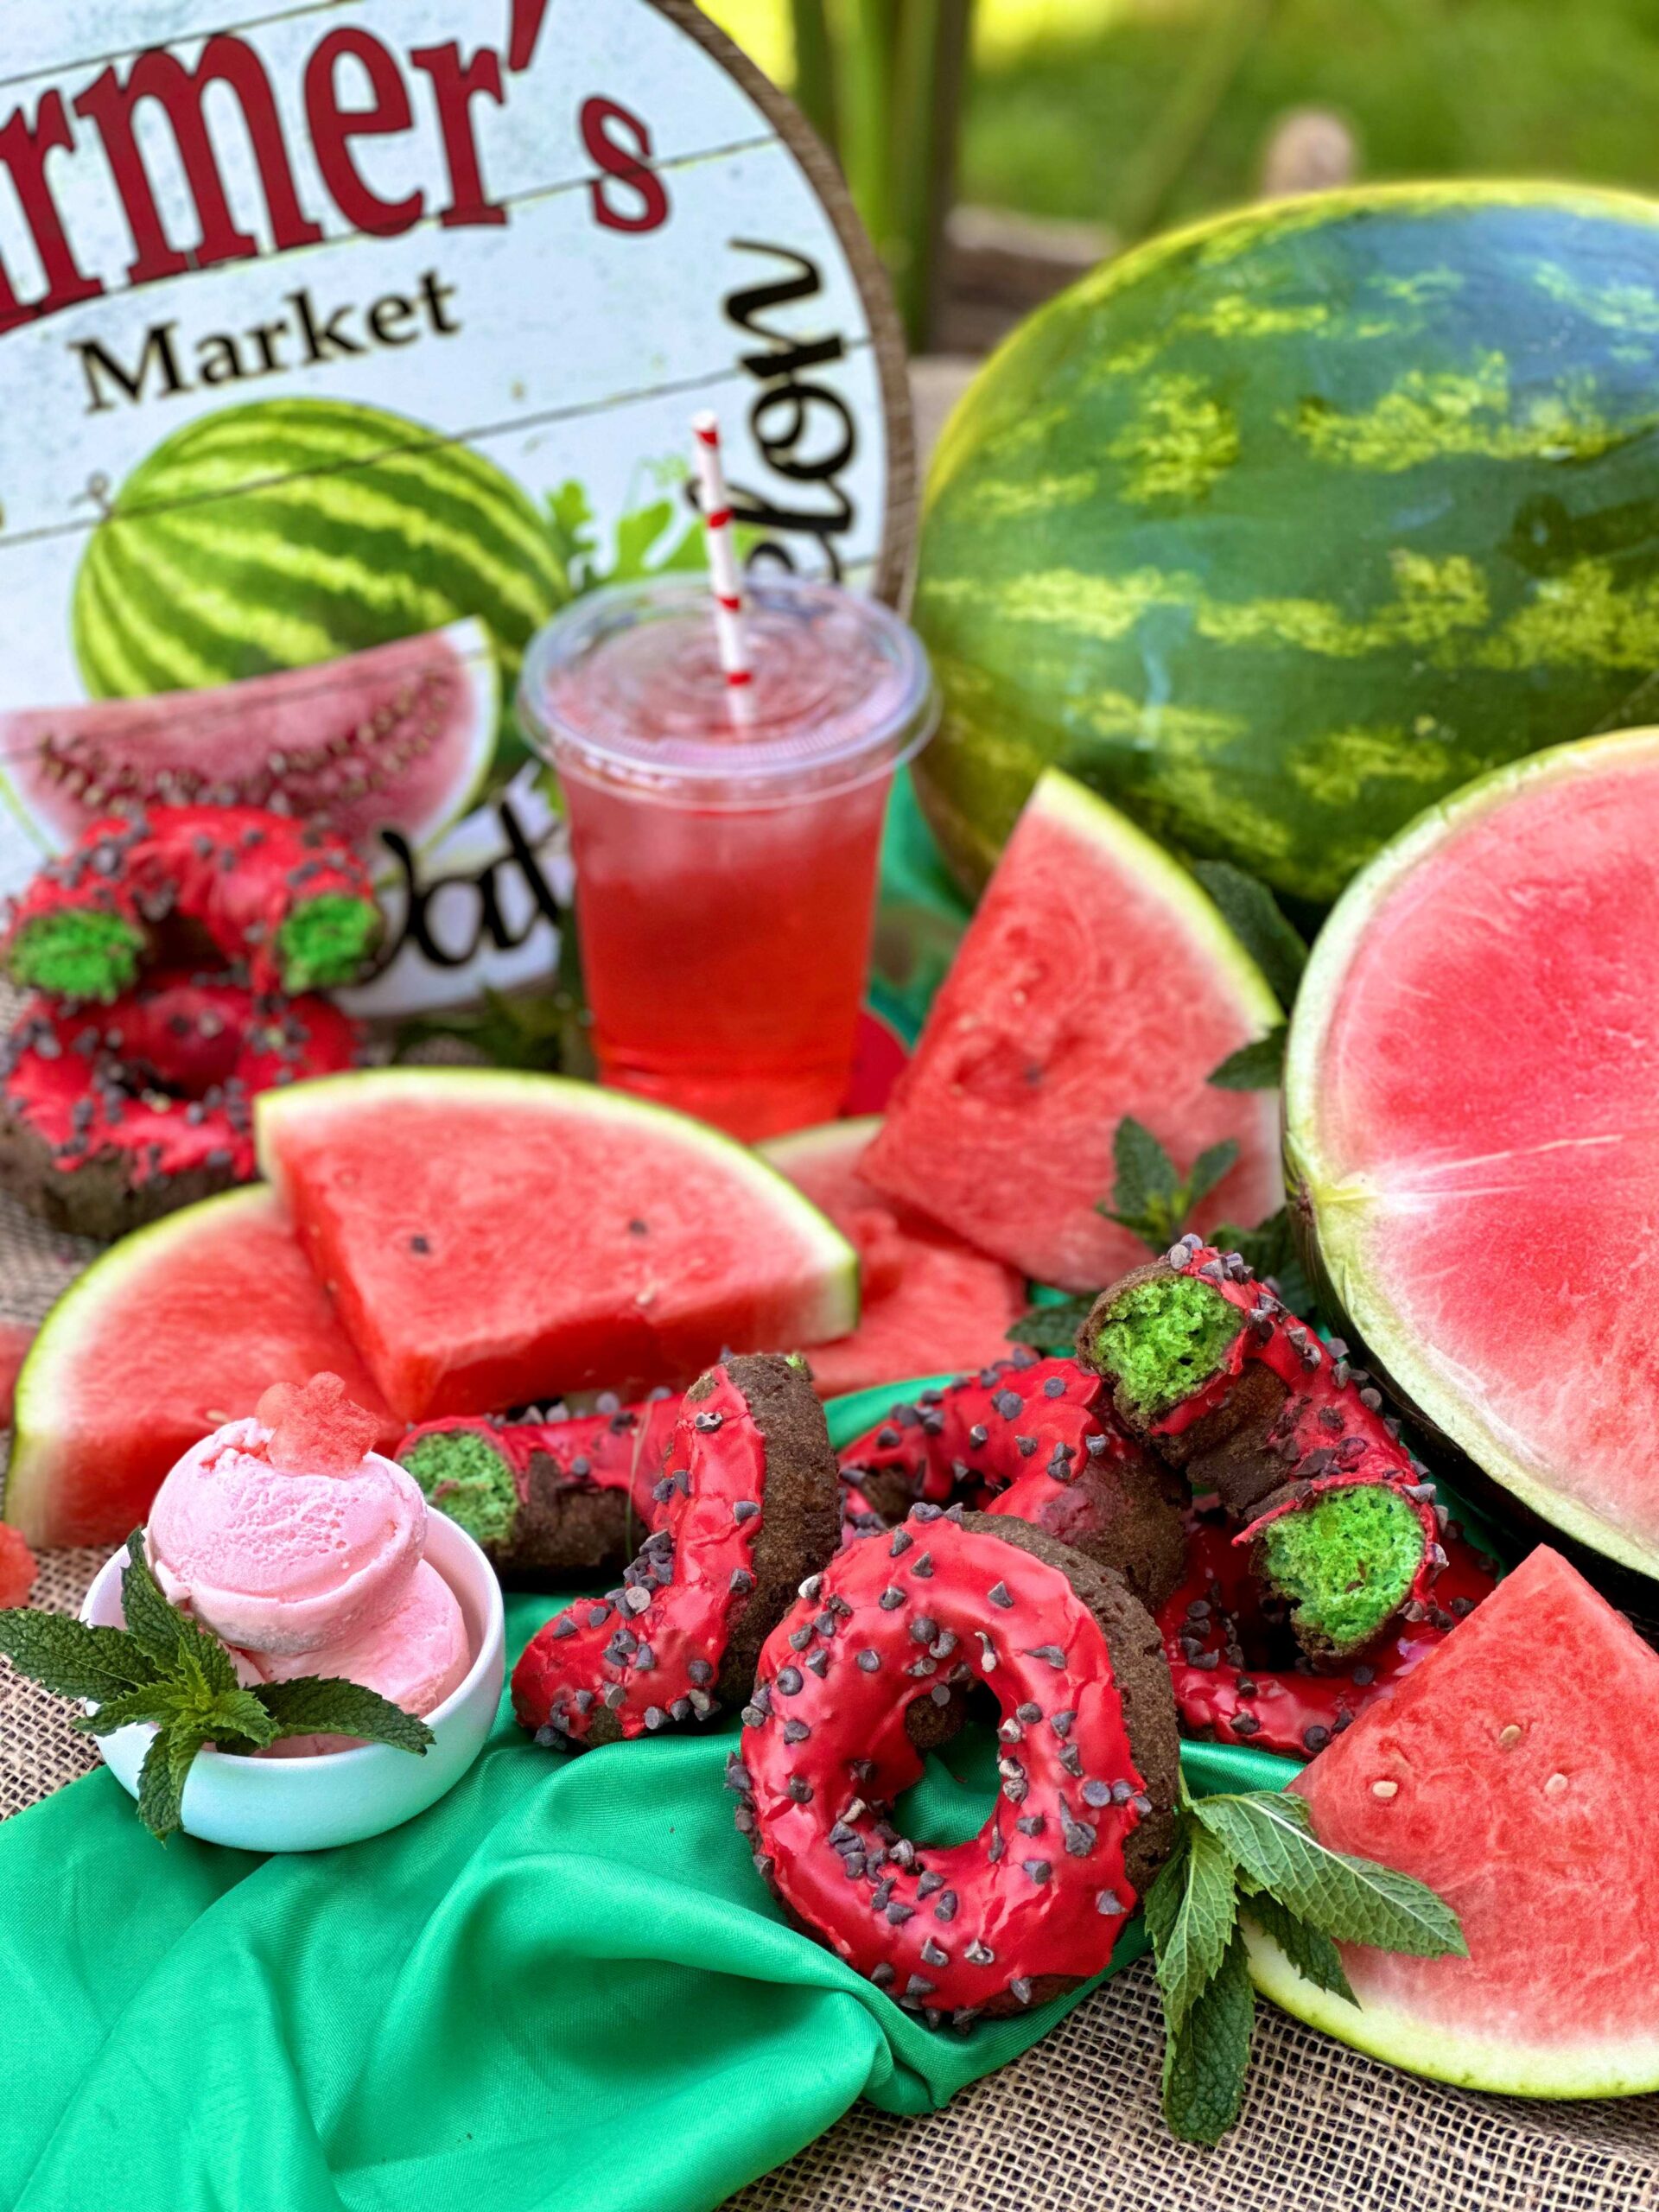 Assorted watermelon pastries, drinks and slices